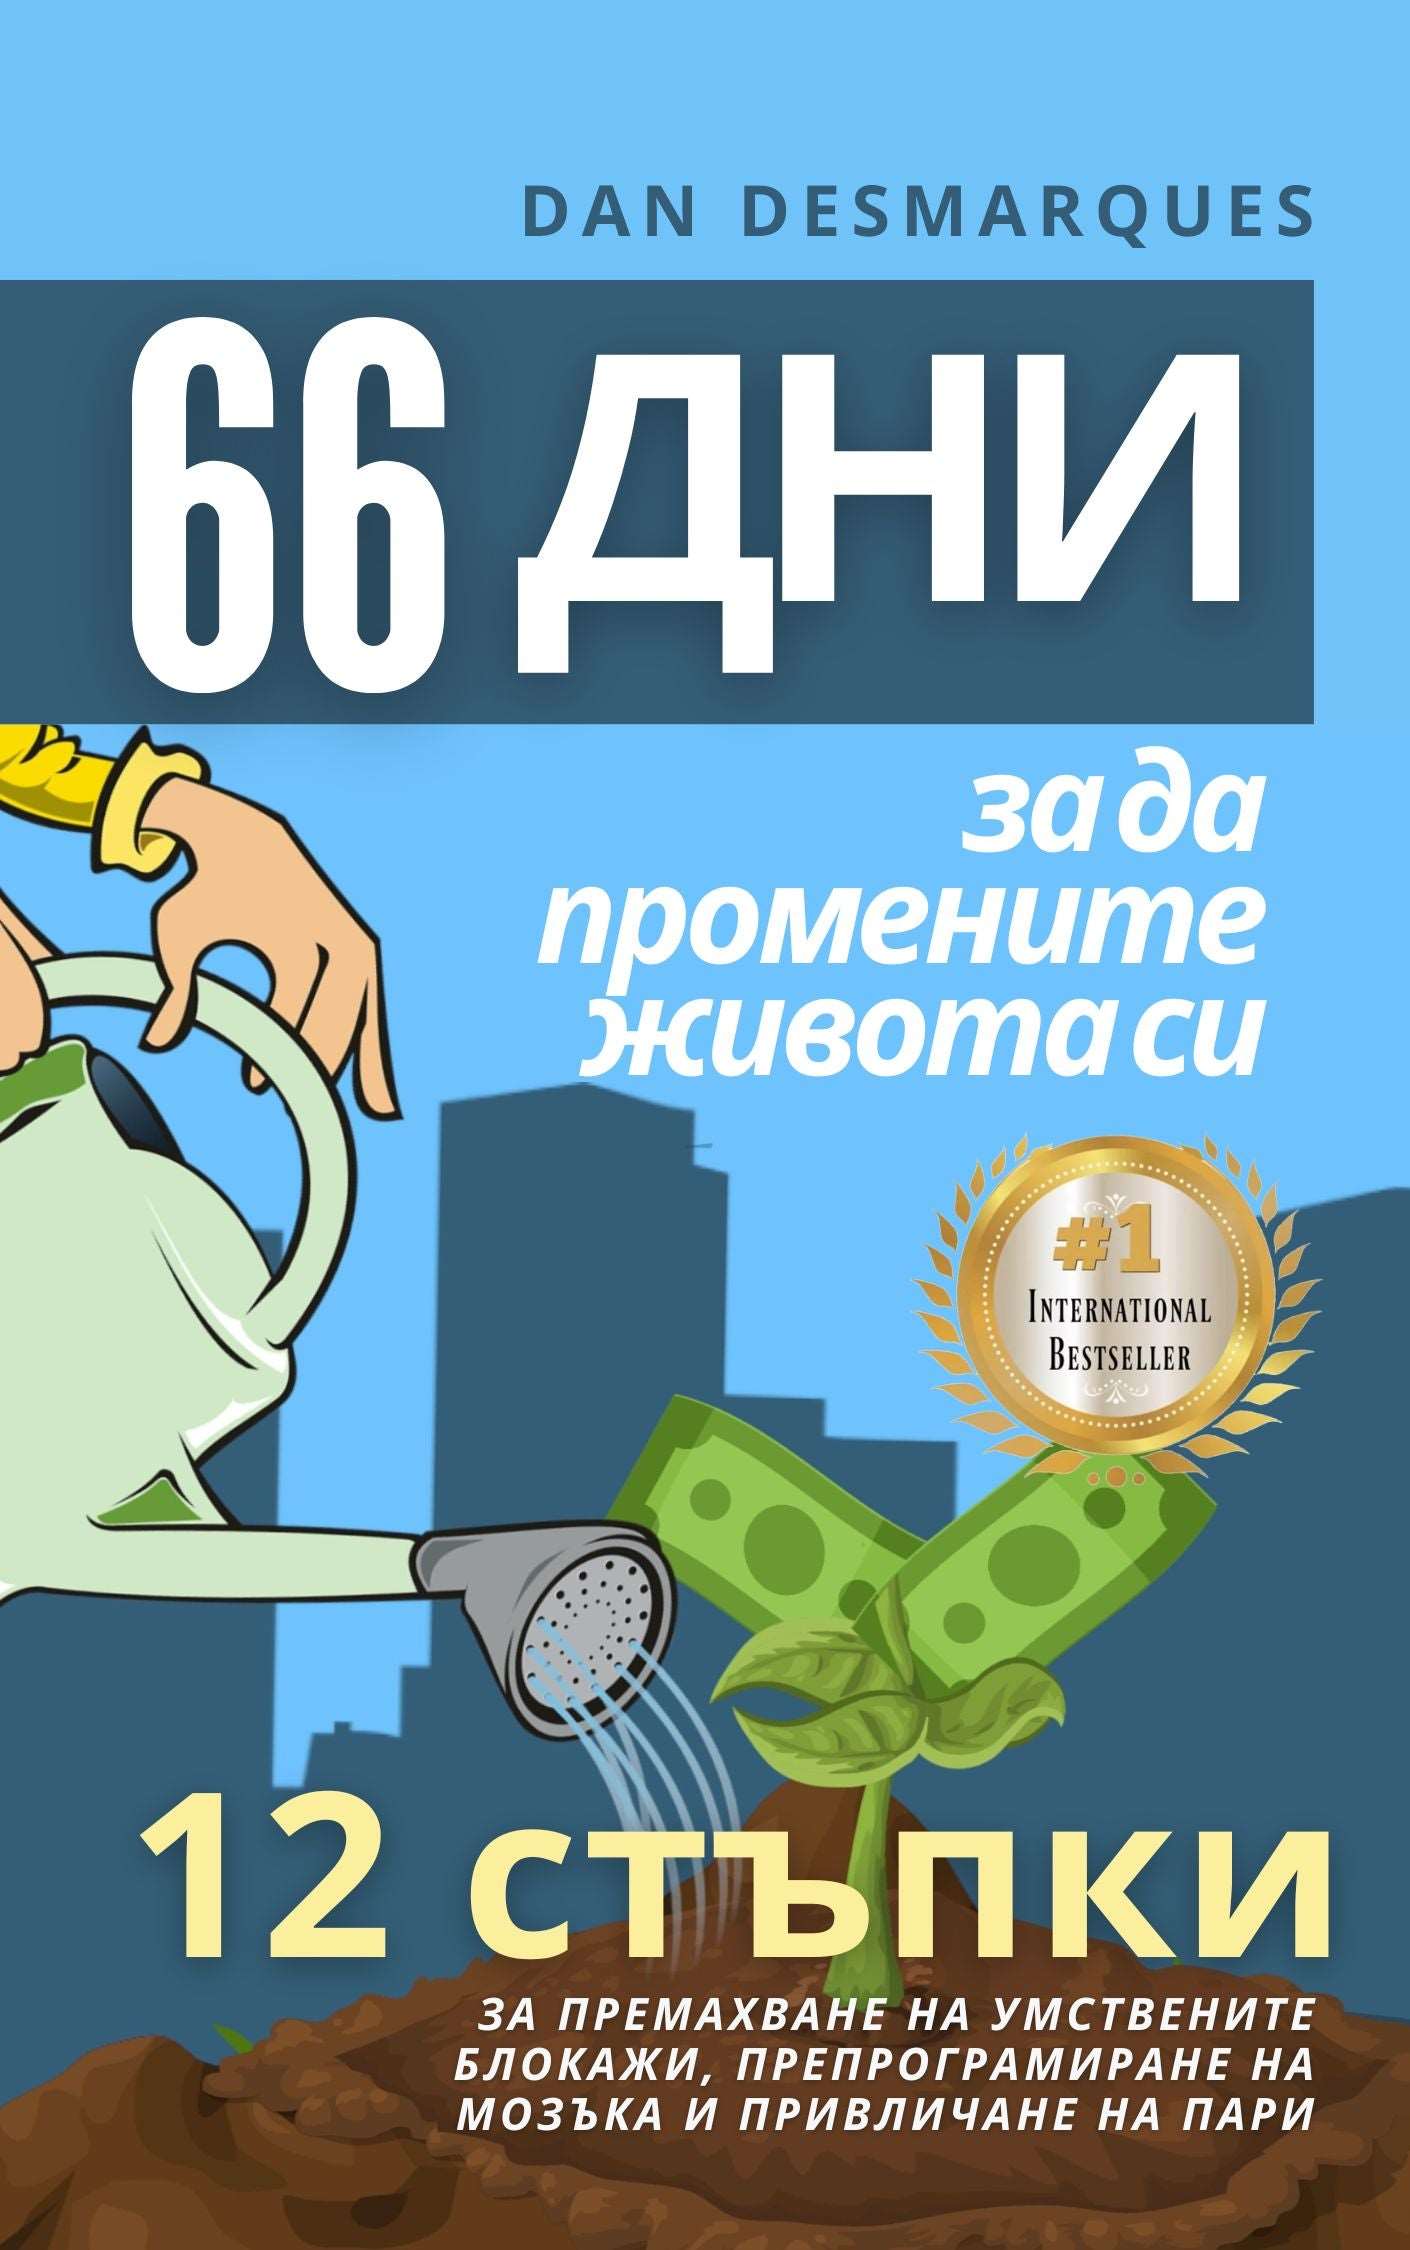 66 Days to Change Your Life Bulgarian